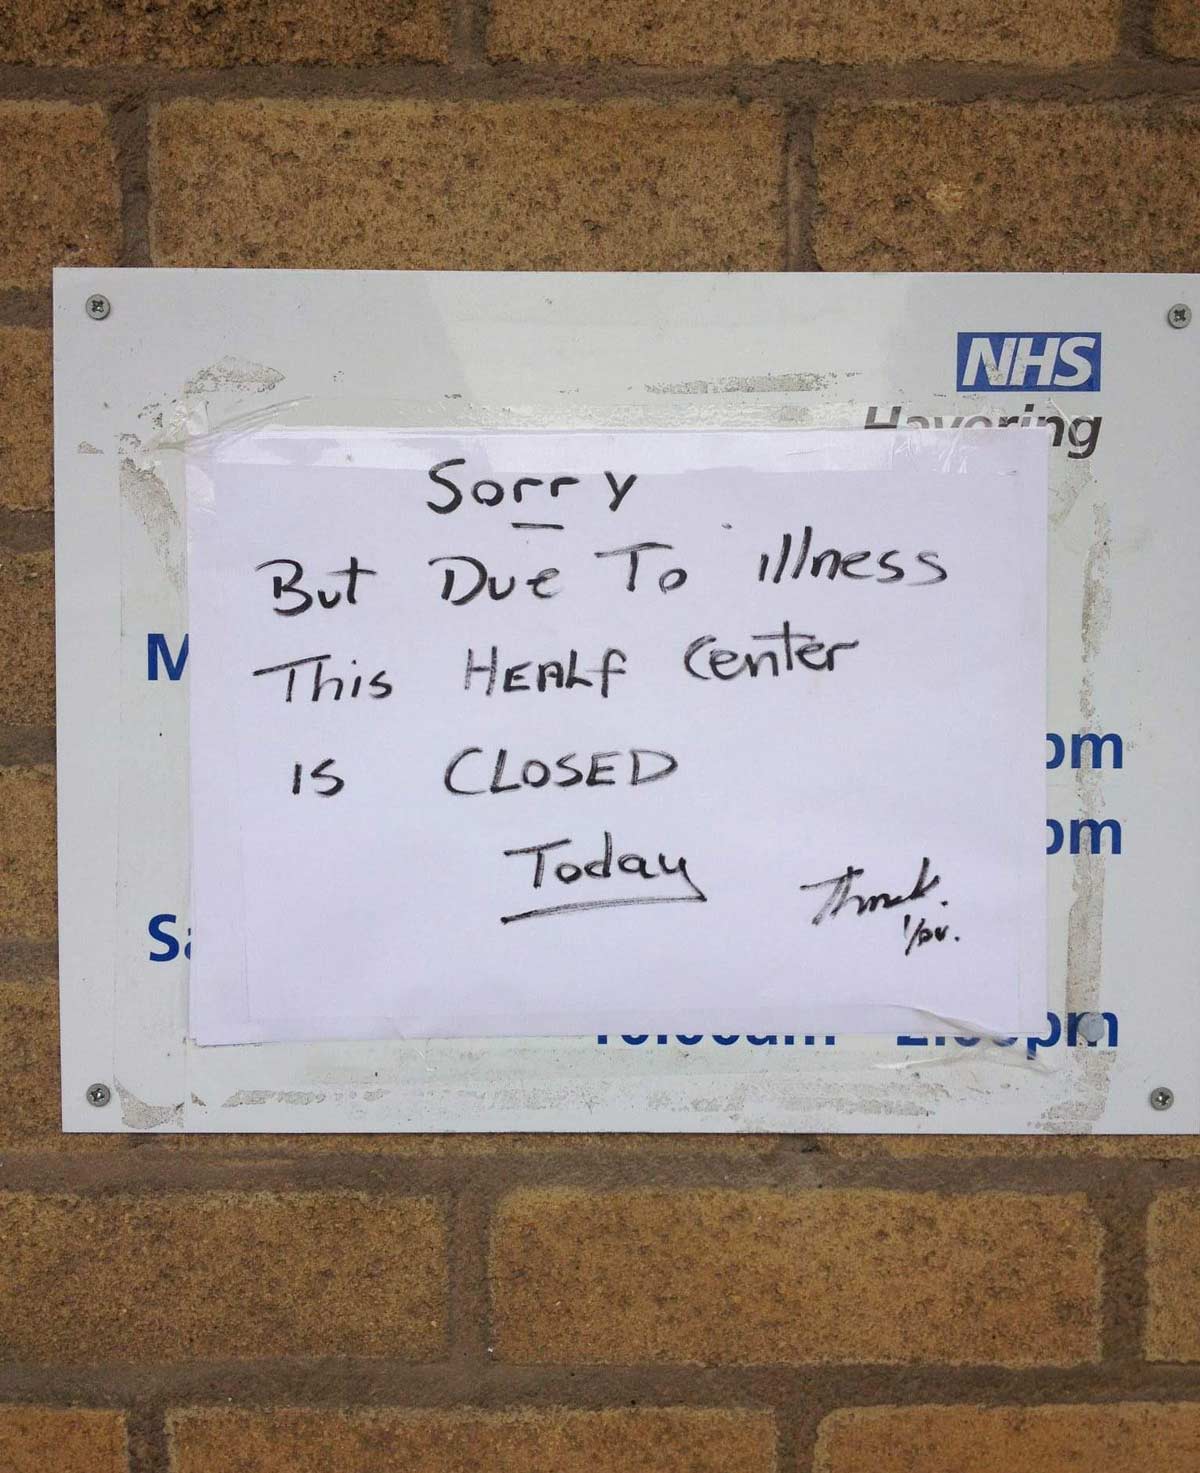 NHS Healf Center closed today